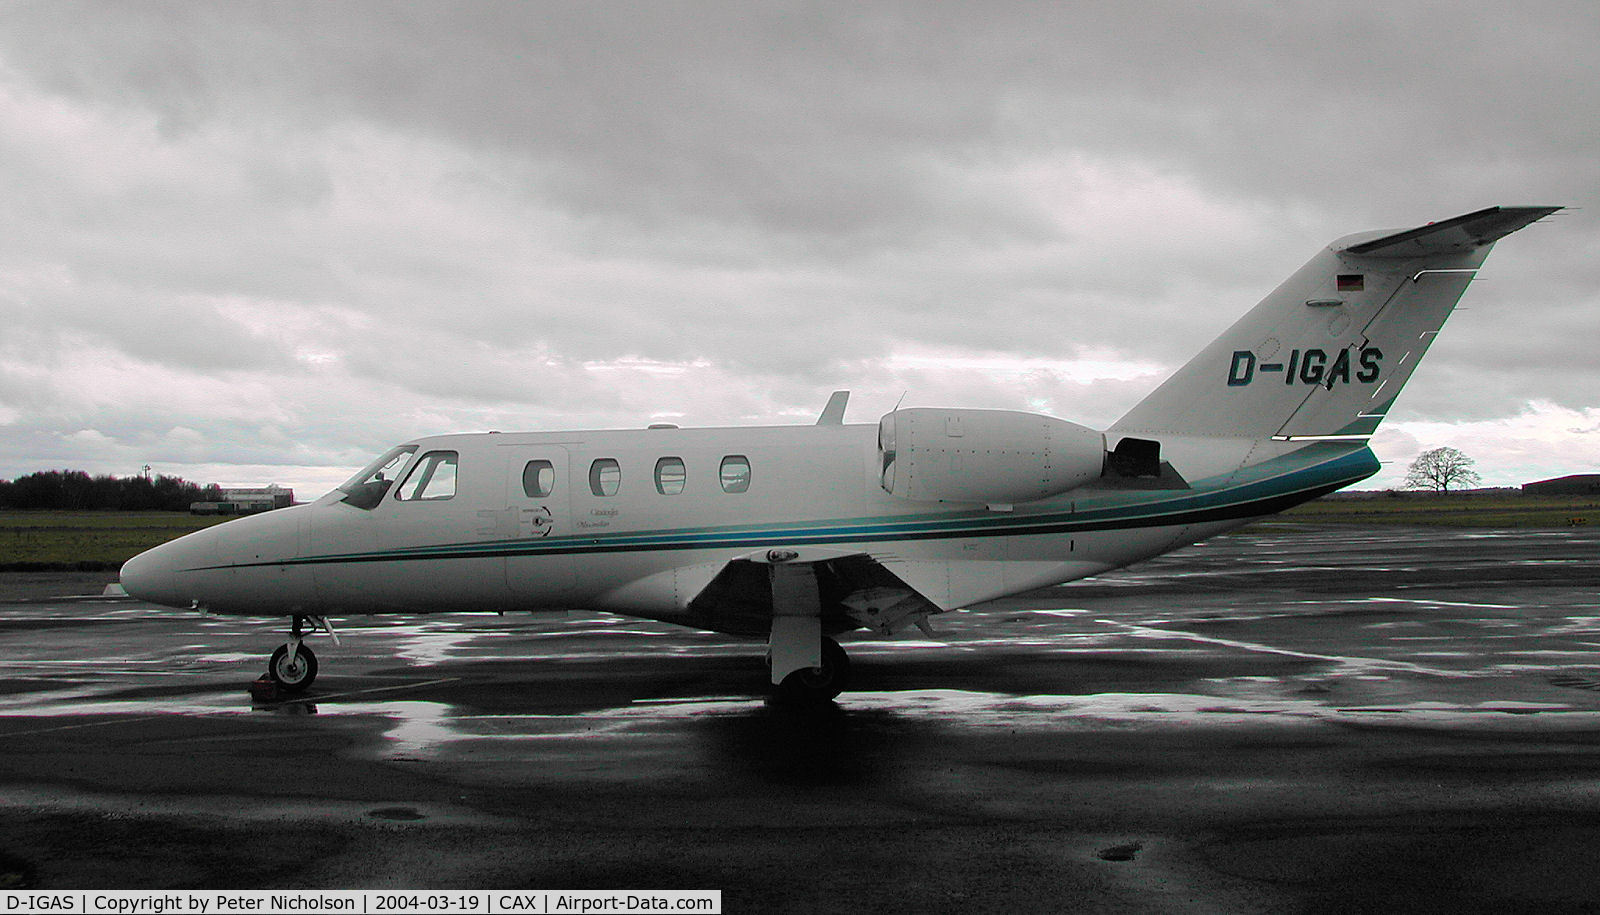 D-IGAS, 1997 Cessna 525 CitationJet C/N 525-0223, Another view of this Cessna 525 CitationJet seen at Carlisle in the Spring of 2004.